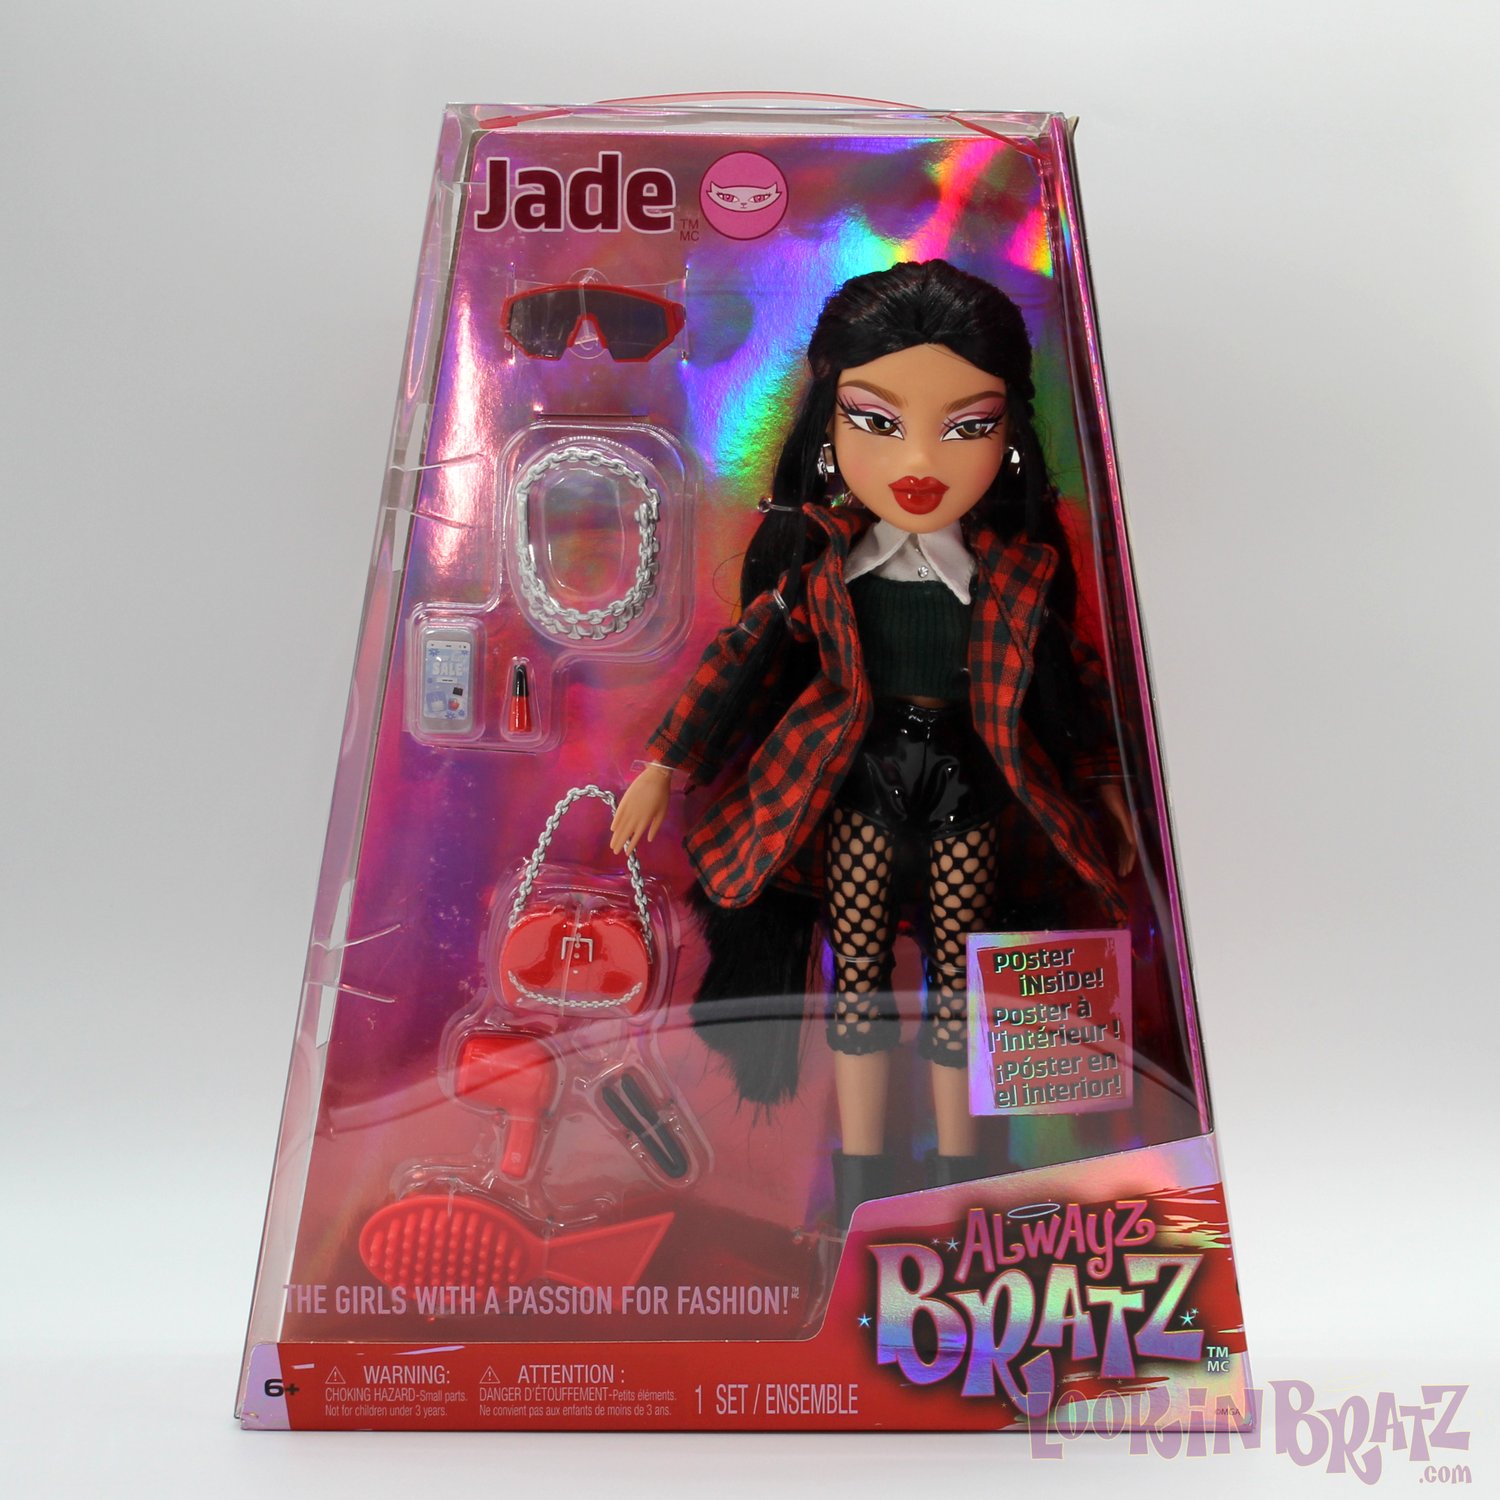 Our  Prime Day Classic Bratz Doll Find - 2006 Sleep-Over Yasmin -  Unboxing & Review 